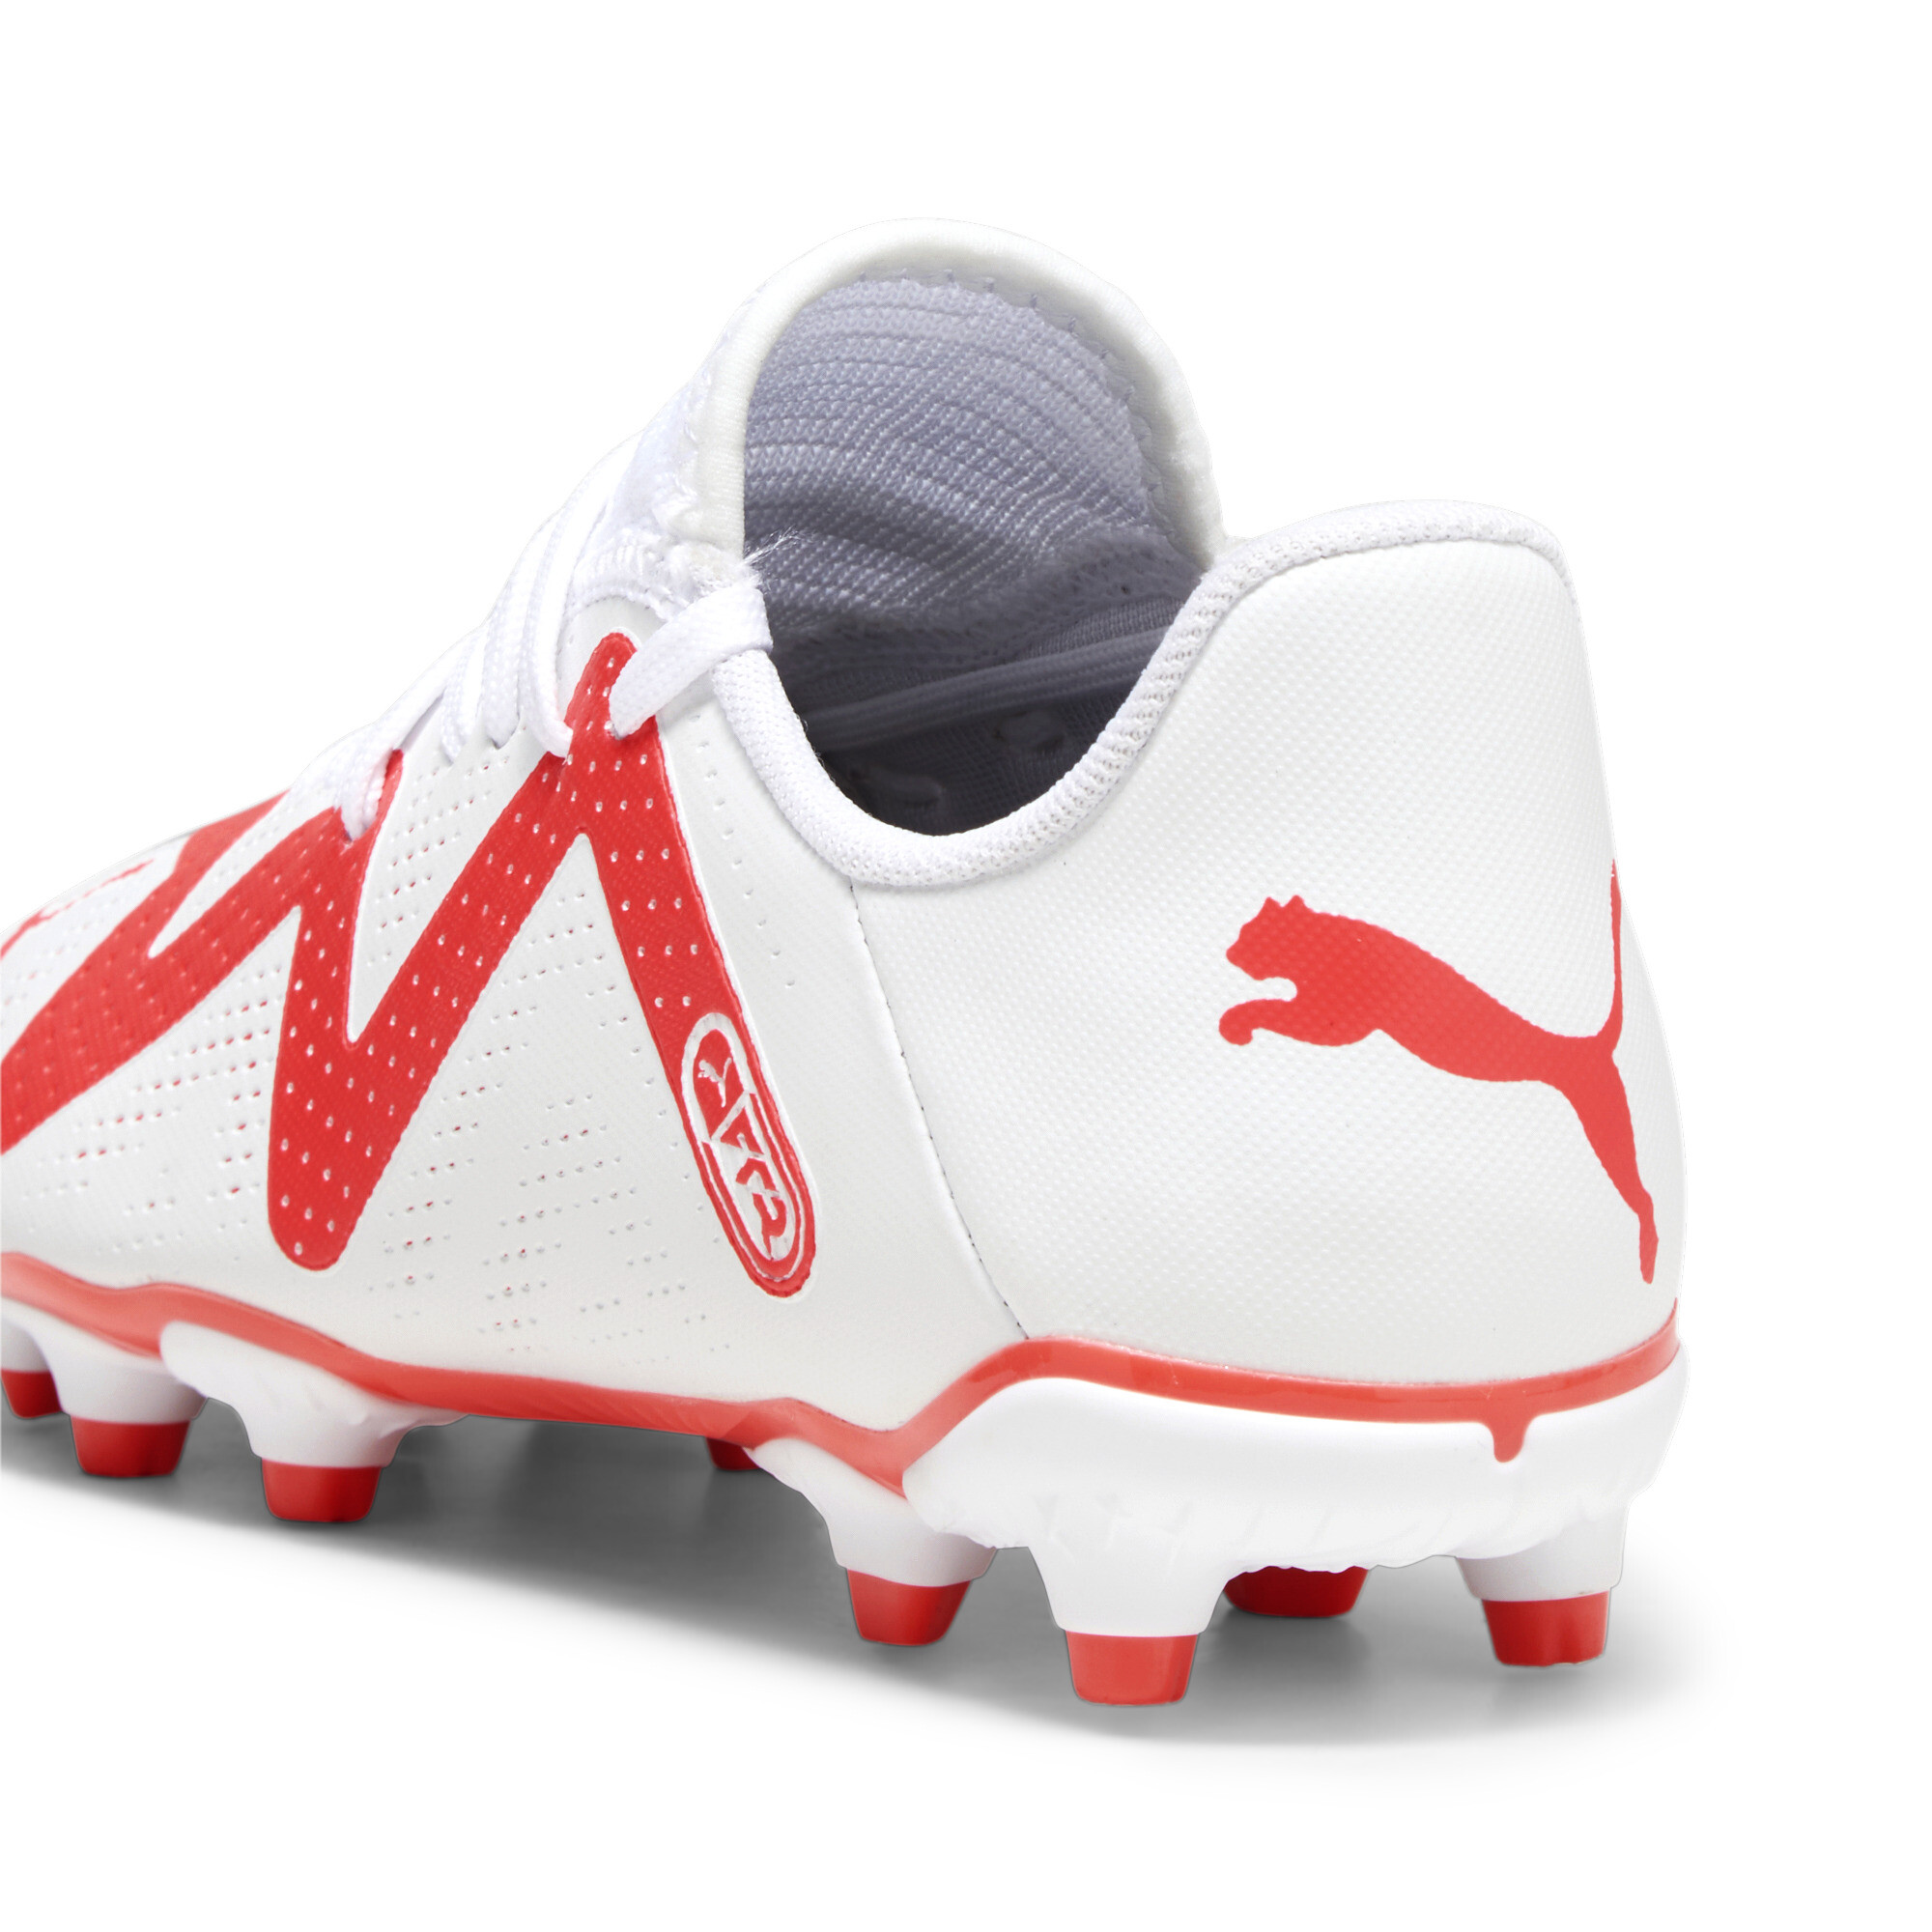 Puma FUTURE PLAY FG/AG Youth Football Boots, White, Size 35.5, Shoes